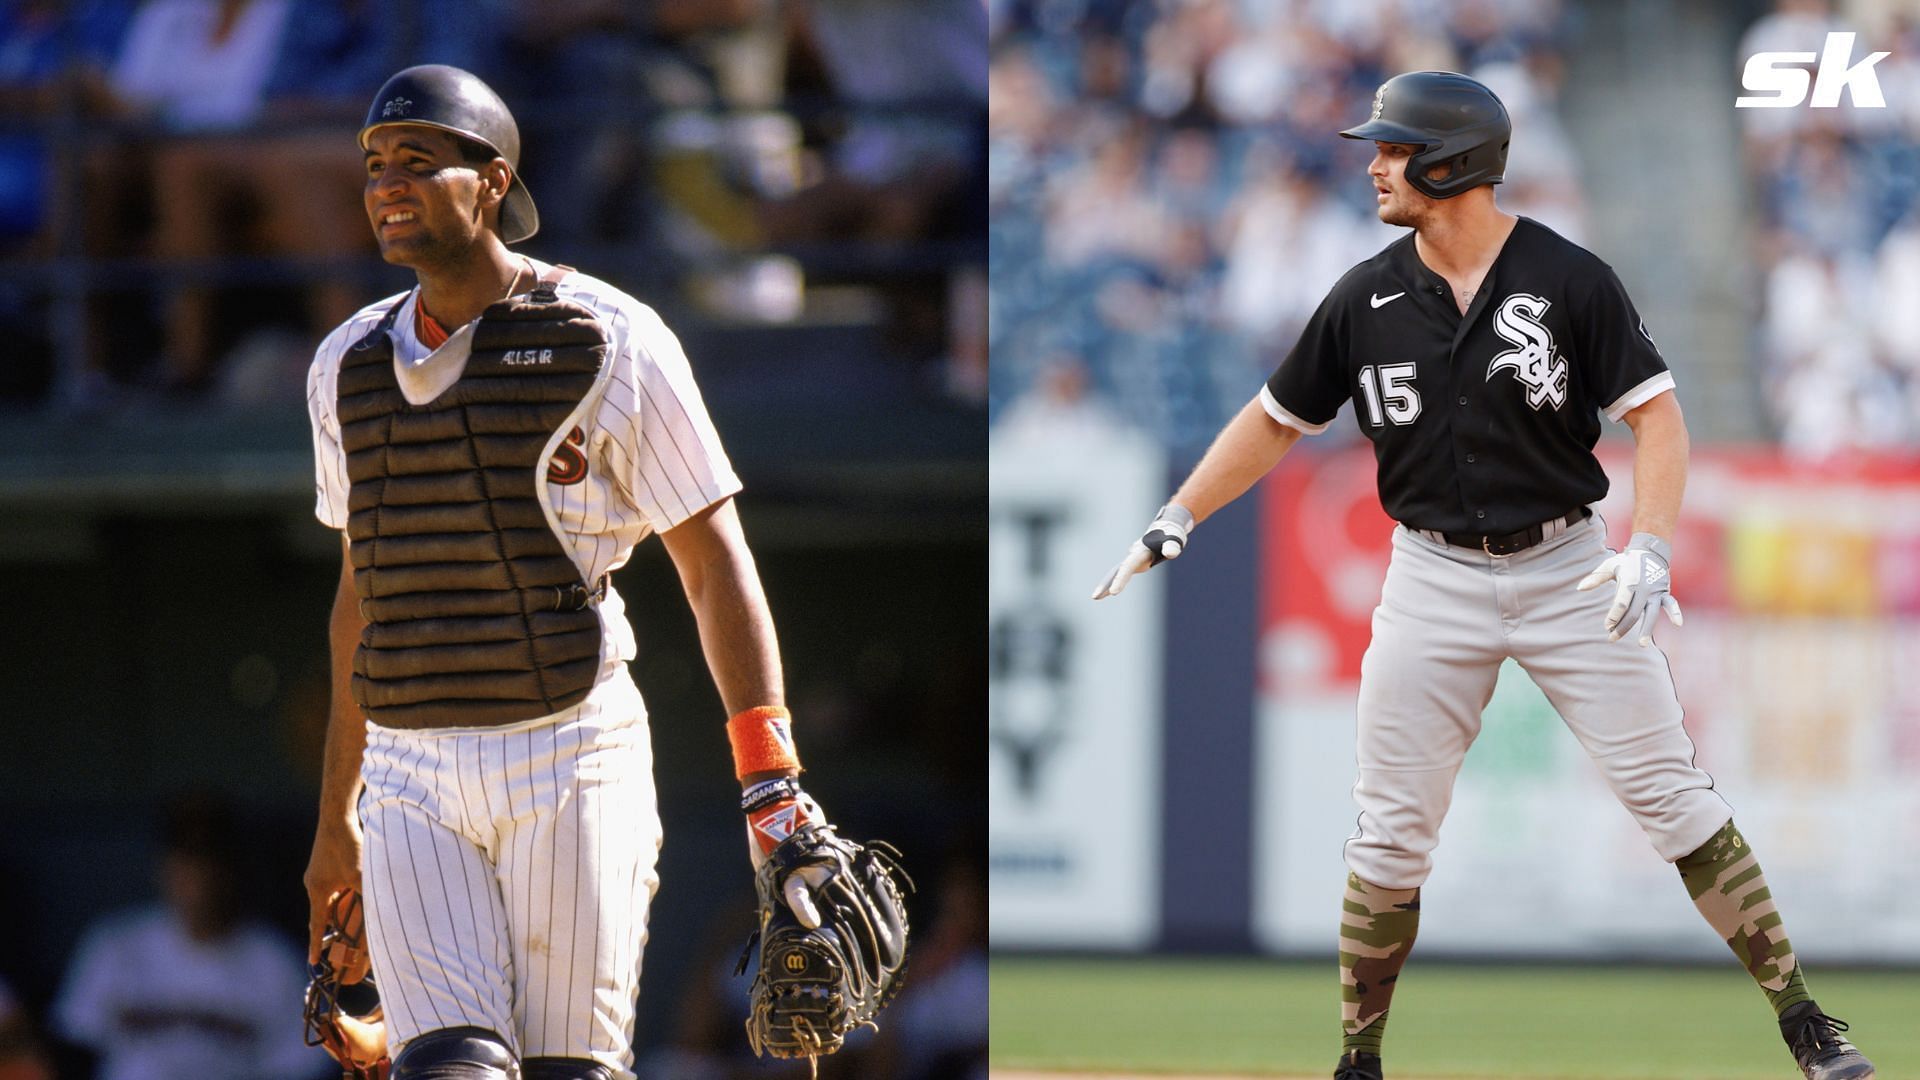 MLB Baseball Players Wearing Black and White Uniforms This Weekend